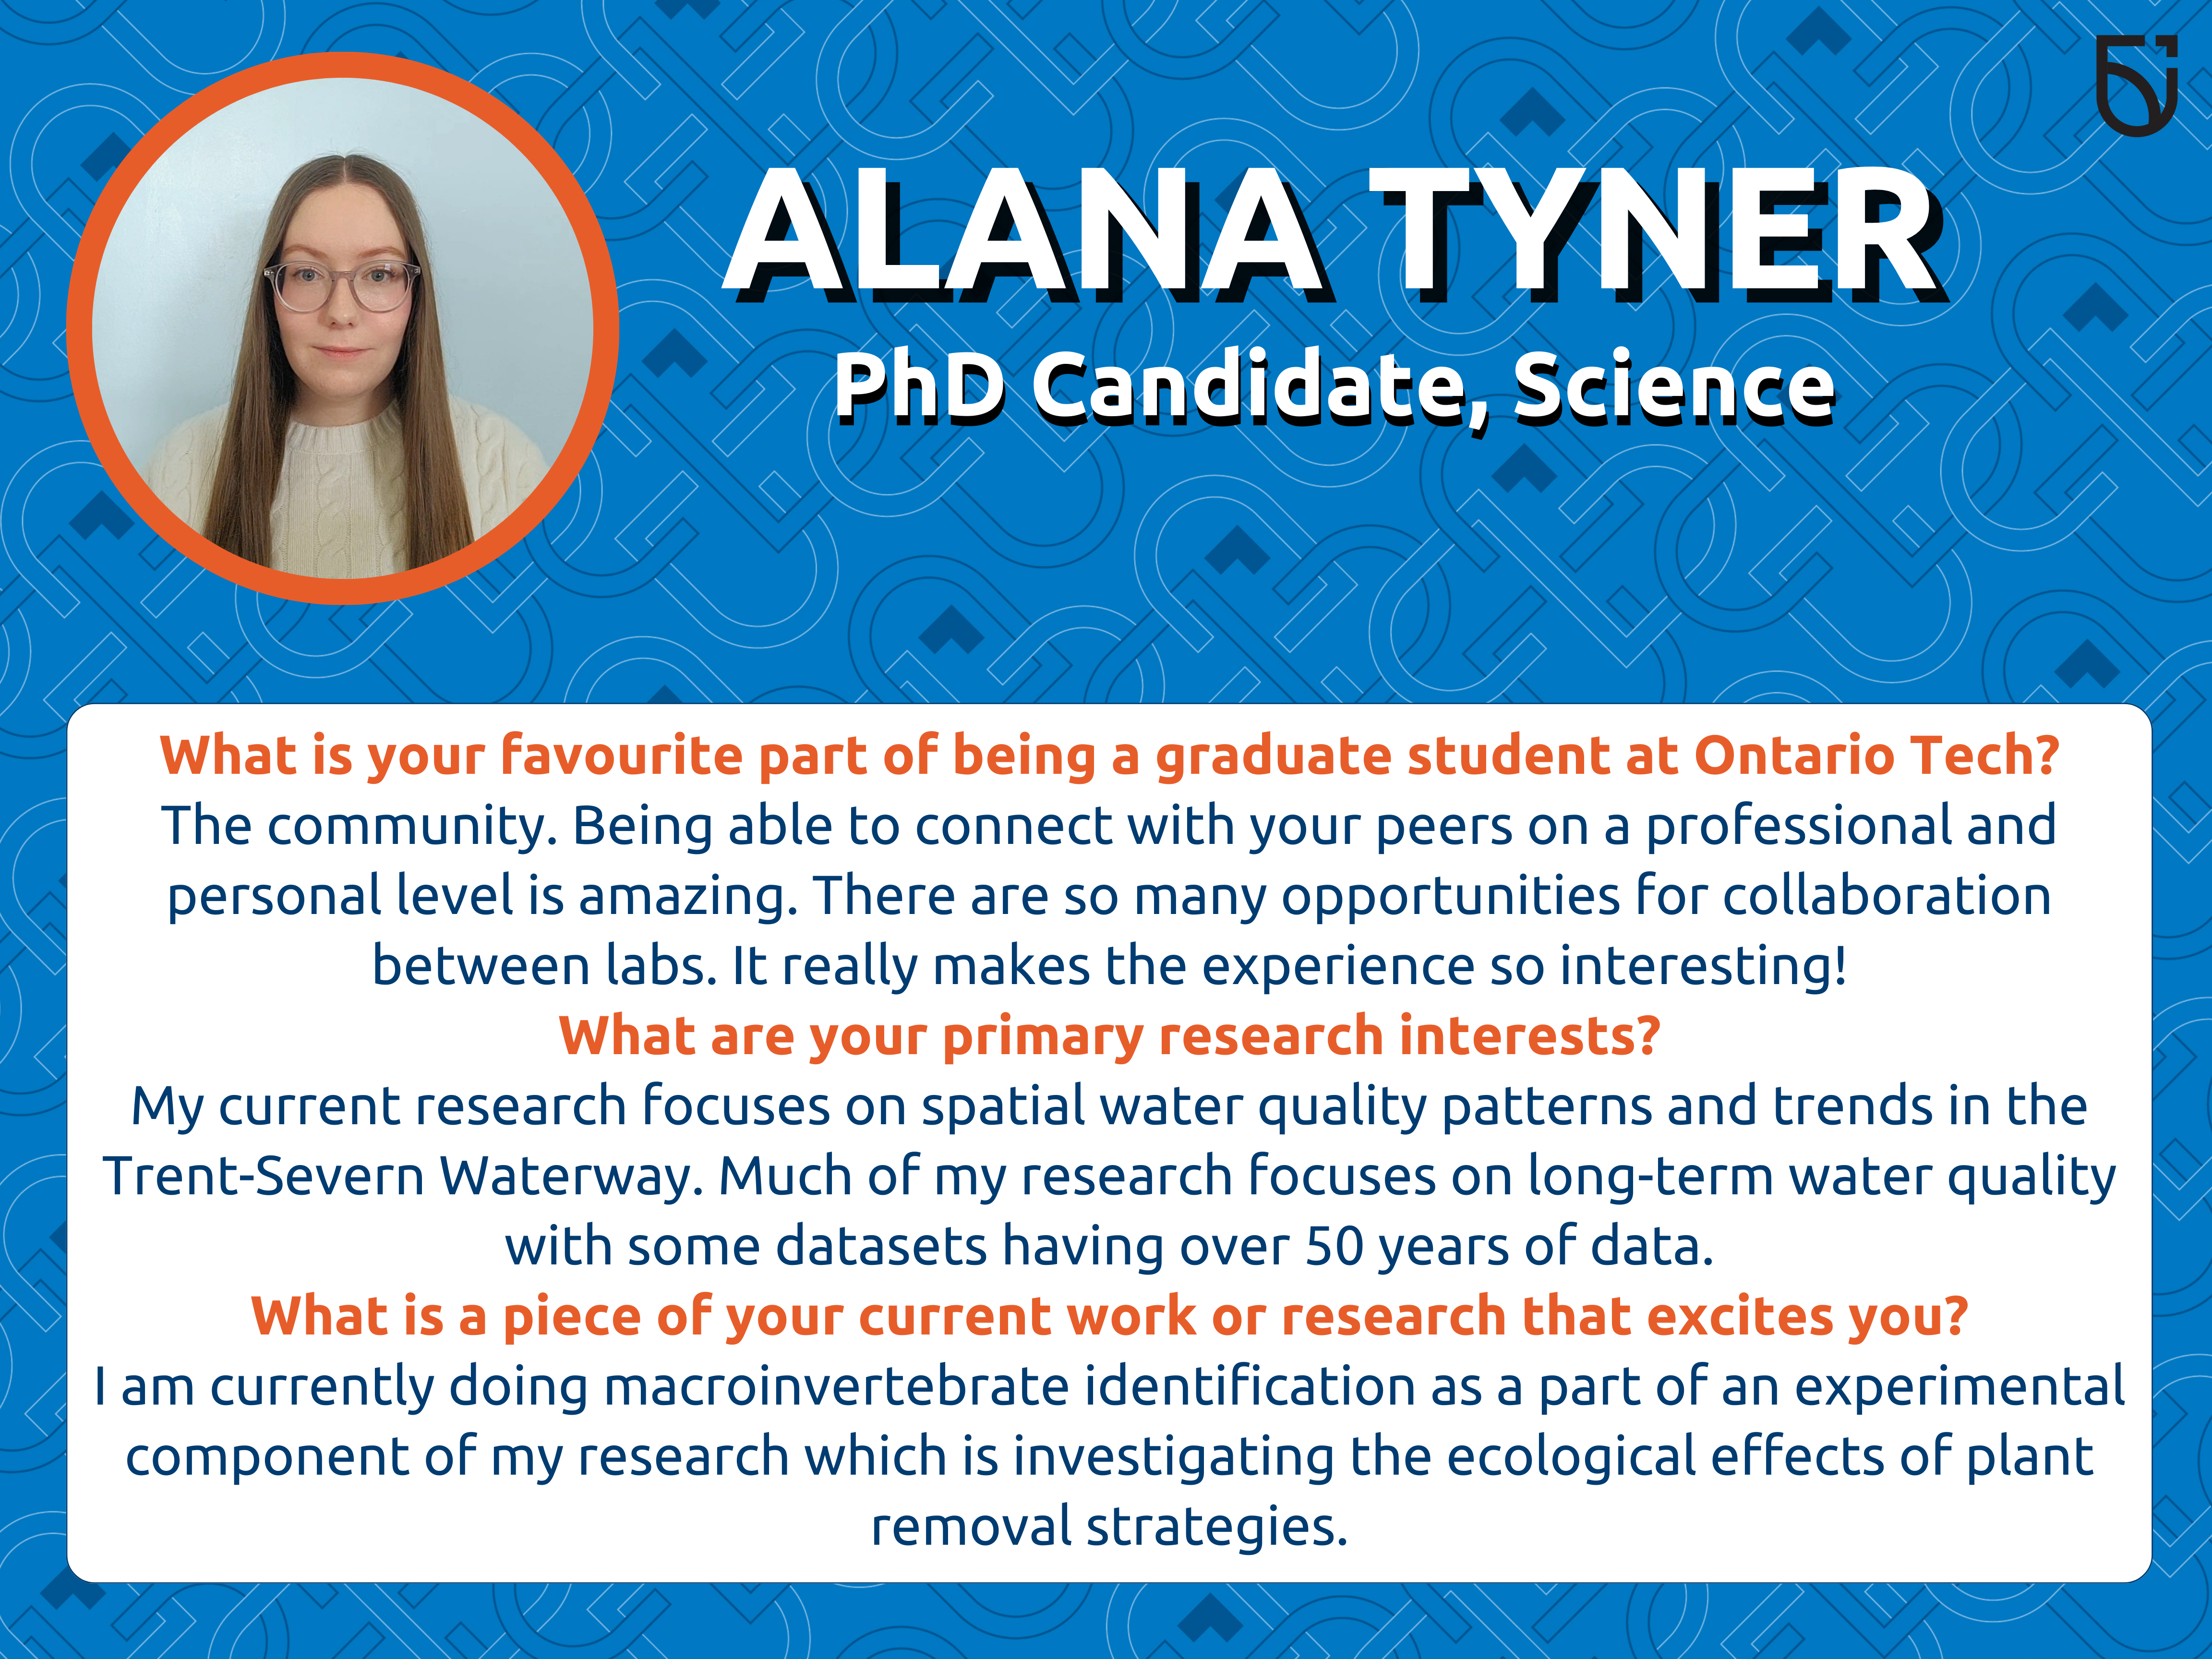 This photo is a Women’s Wednesday feature of Alana Tyner, a PhD Candidate, in the Faculty of Science.